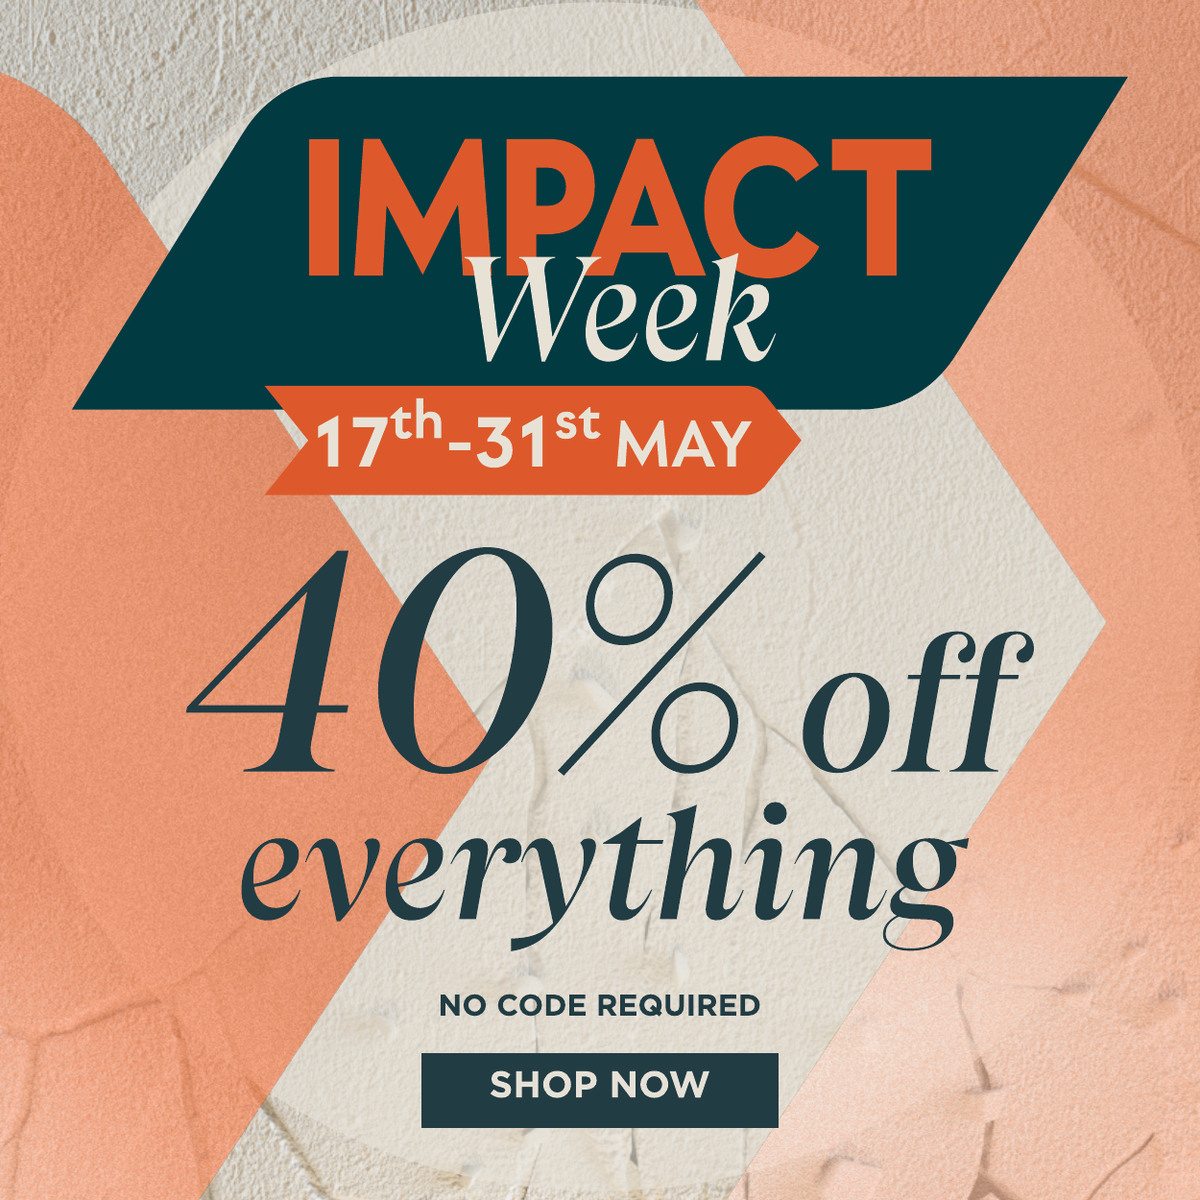 Impact week is here. 40% off everything no code required